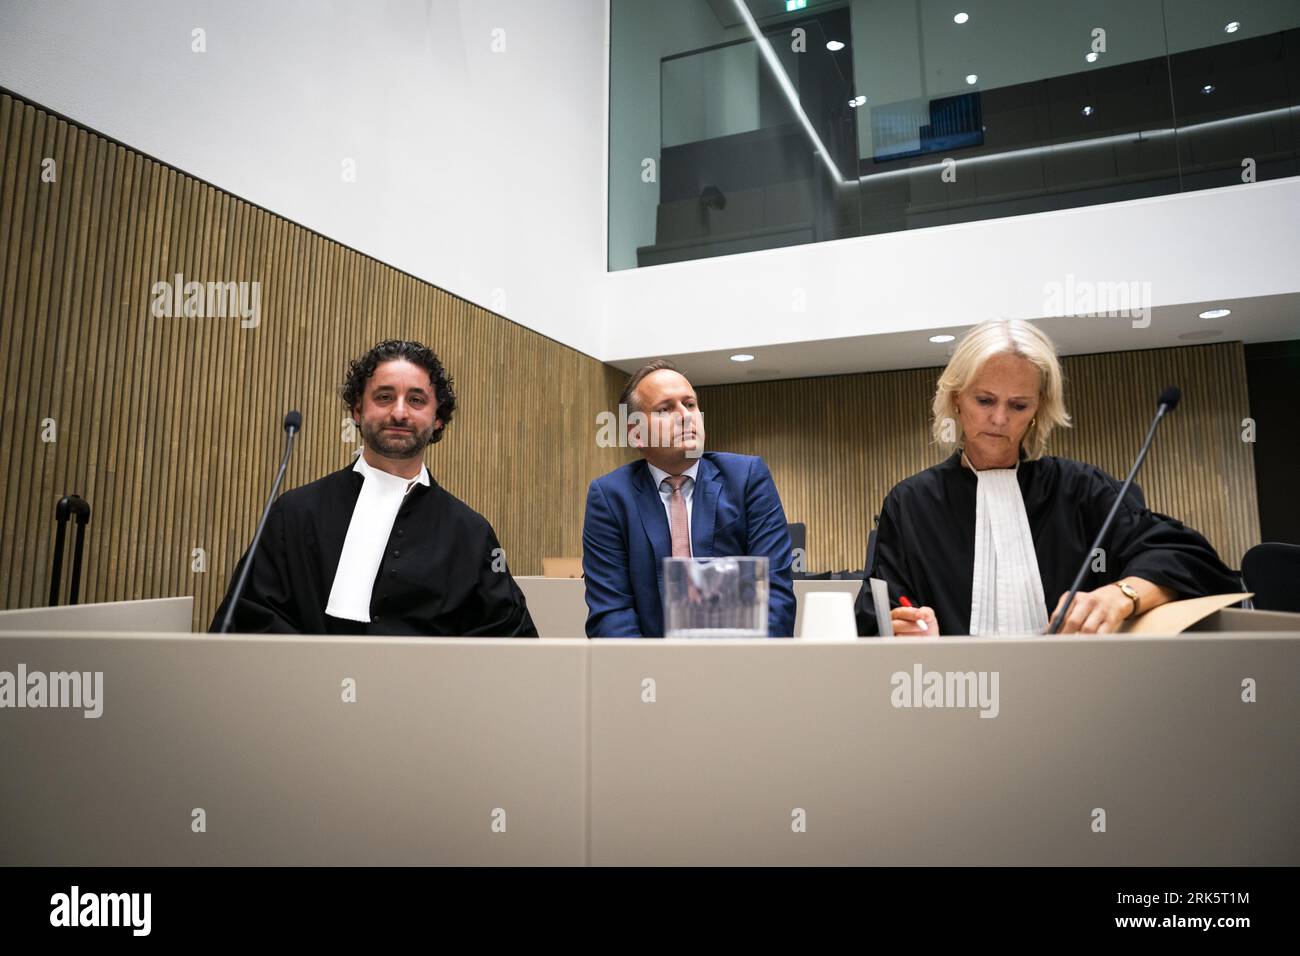 AMSTERDAM - Party chairman of Volt, Rob Keijsers (m) with lawyers in court for a hearing in the case of Gündogan against Volt about defamation and slander. Gundogan has been expelled from Volt's faction following allegations of misconduct. She resisted and was proved right by the judge, allowing her to return to the Volt faction. The party then appealed and won. ANP JEROEN JUMELET netherlands out - belgium out Stock Photo